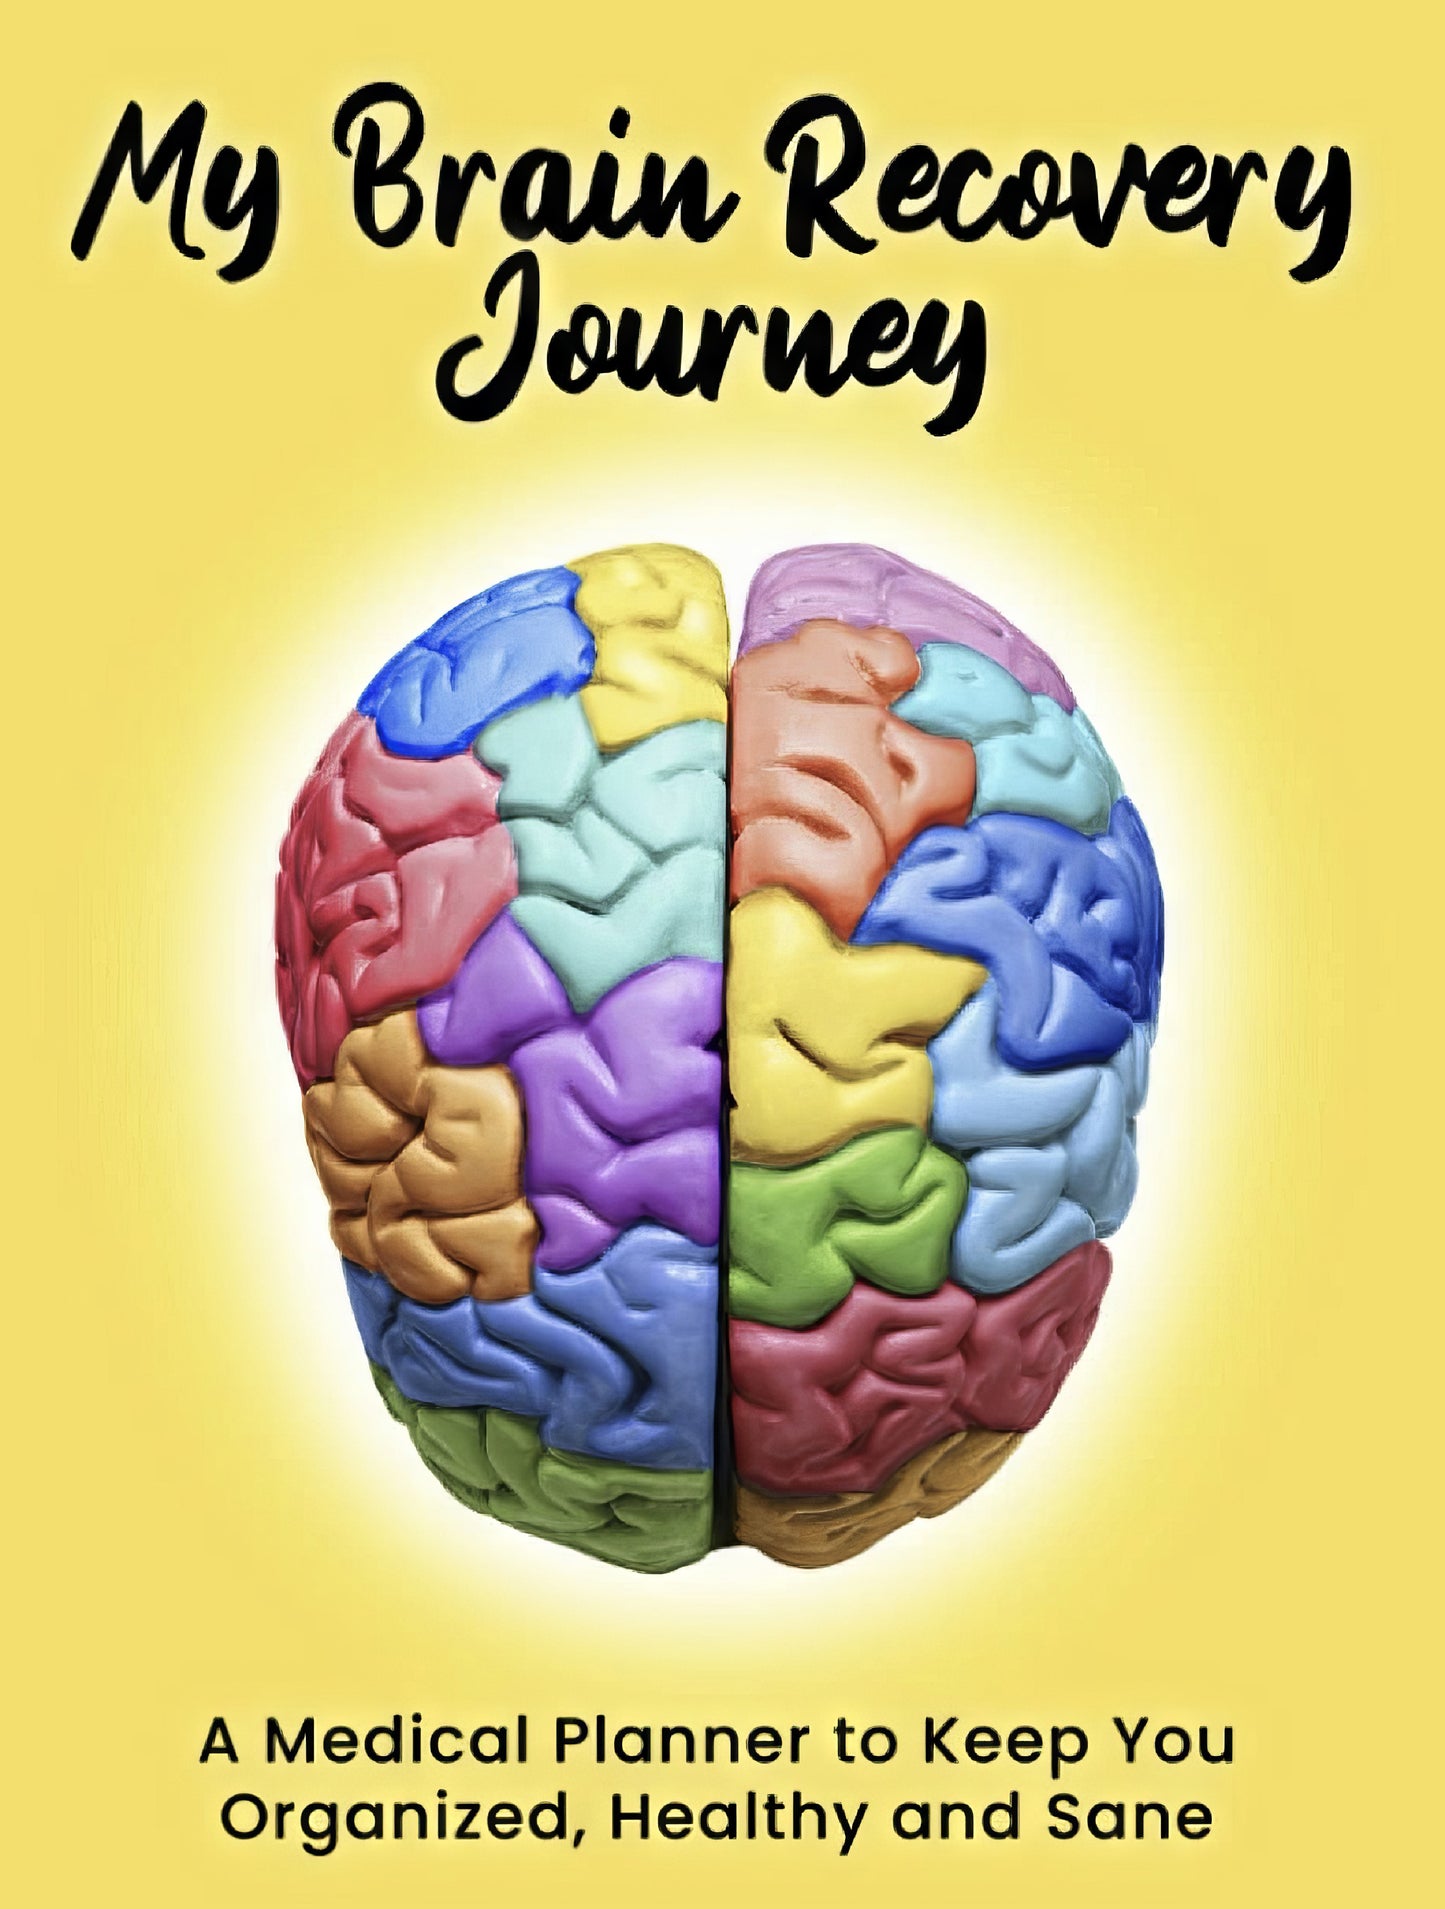 My Brain Recovery Journey - Medical Planner